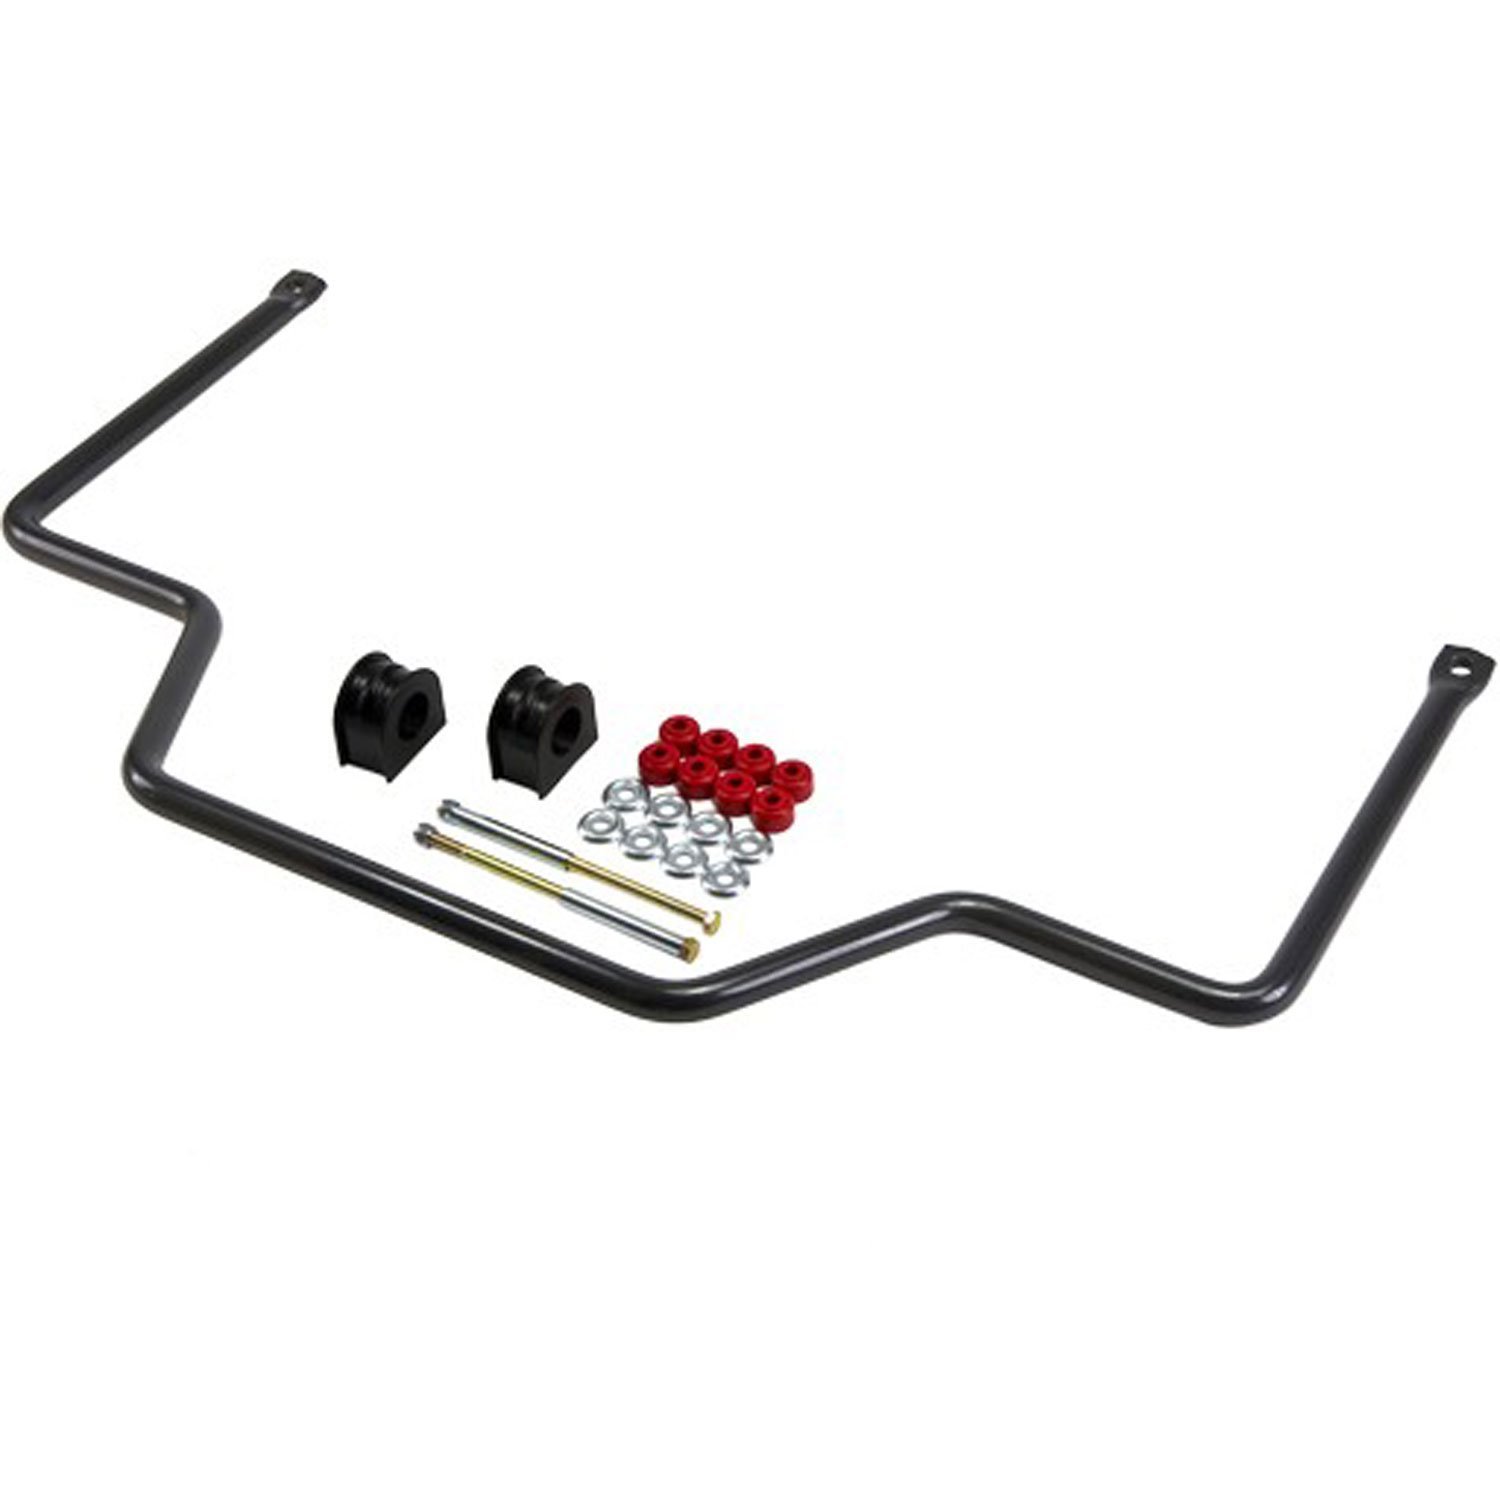 Front Sway Bar Kit for 1997-2003 Ford F-150